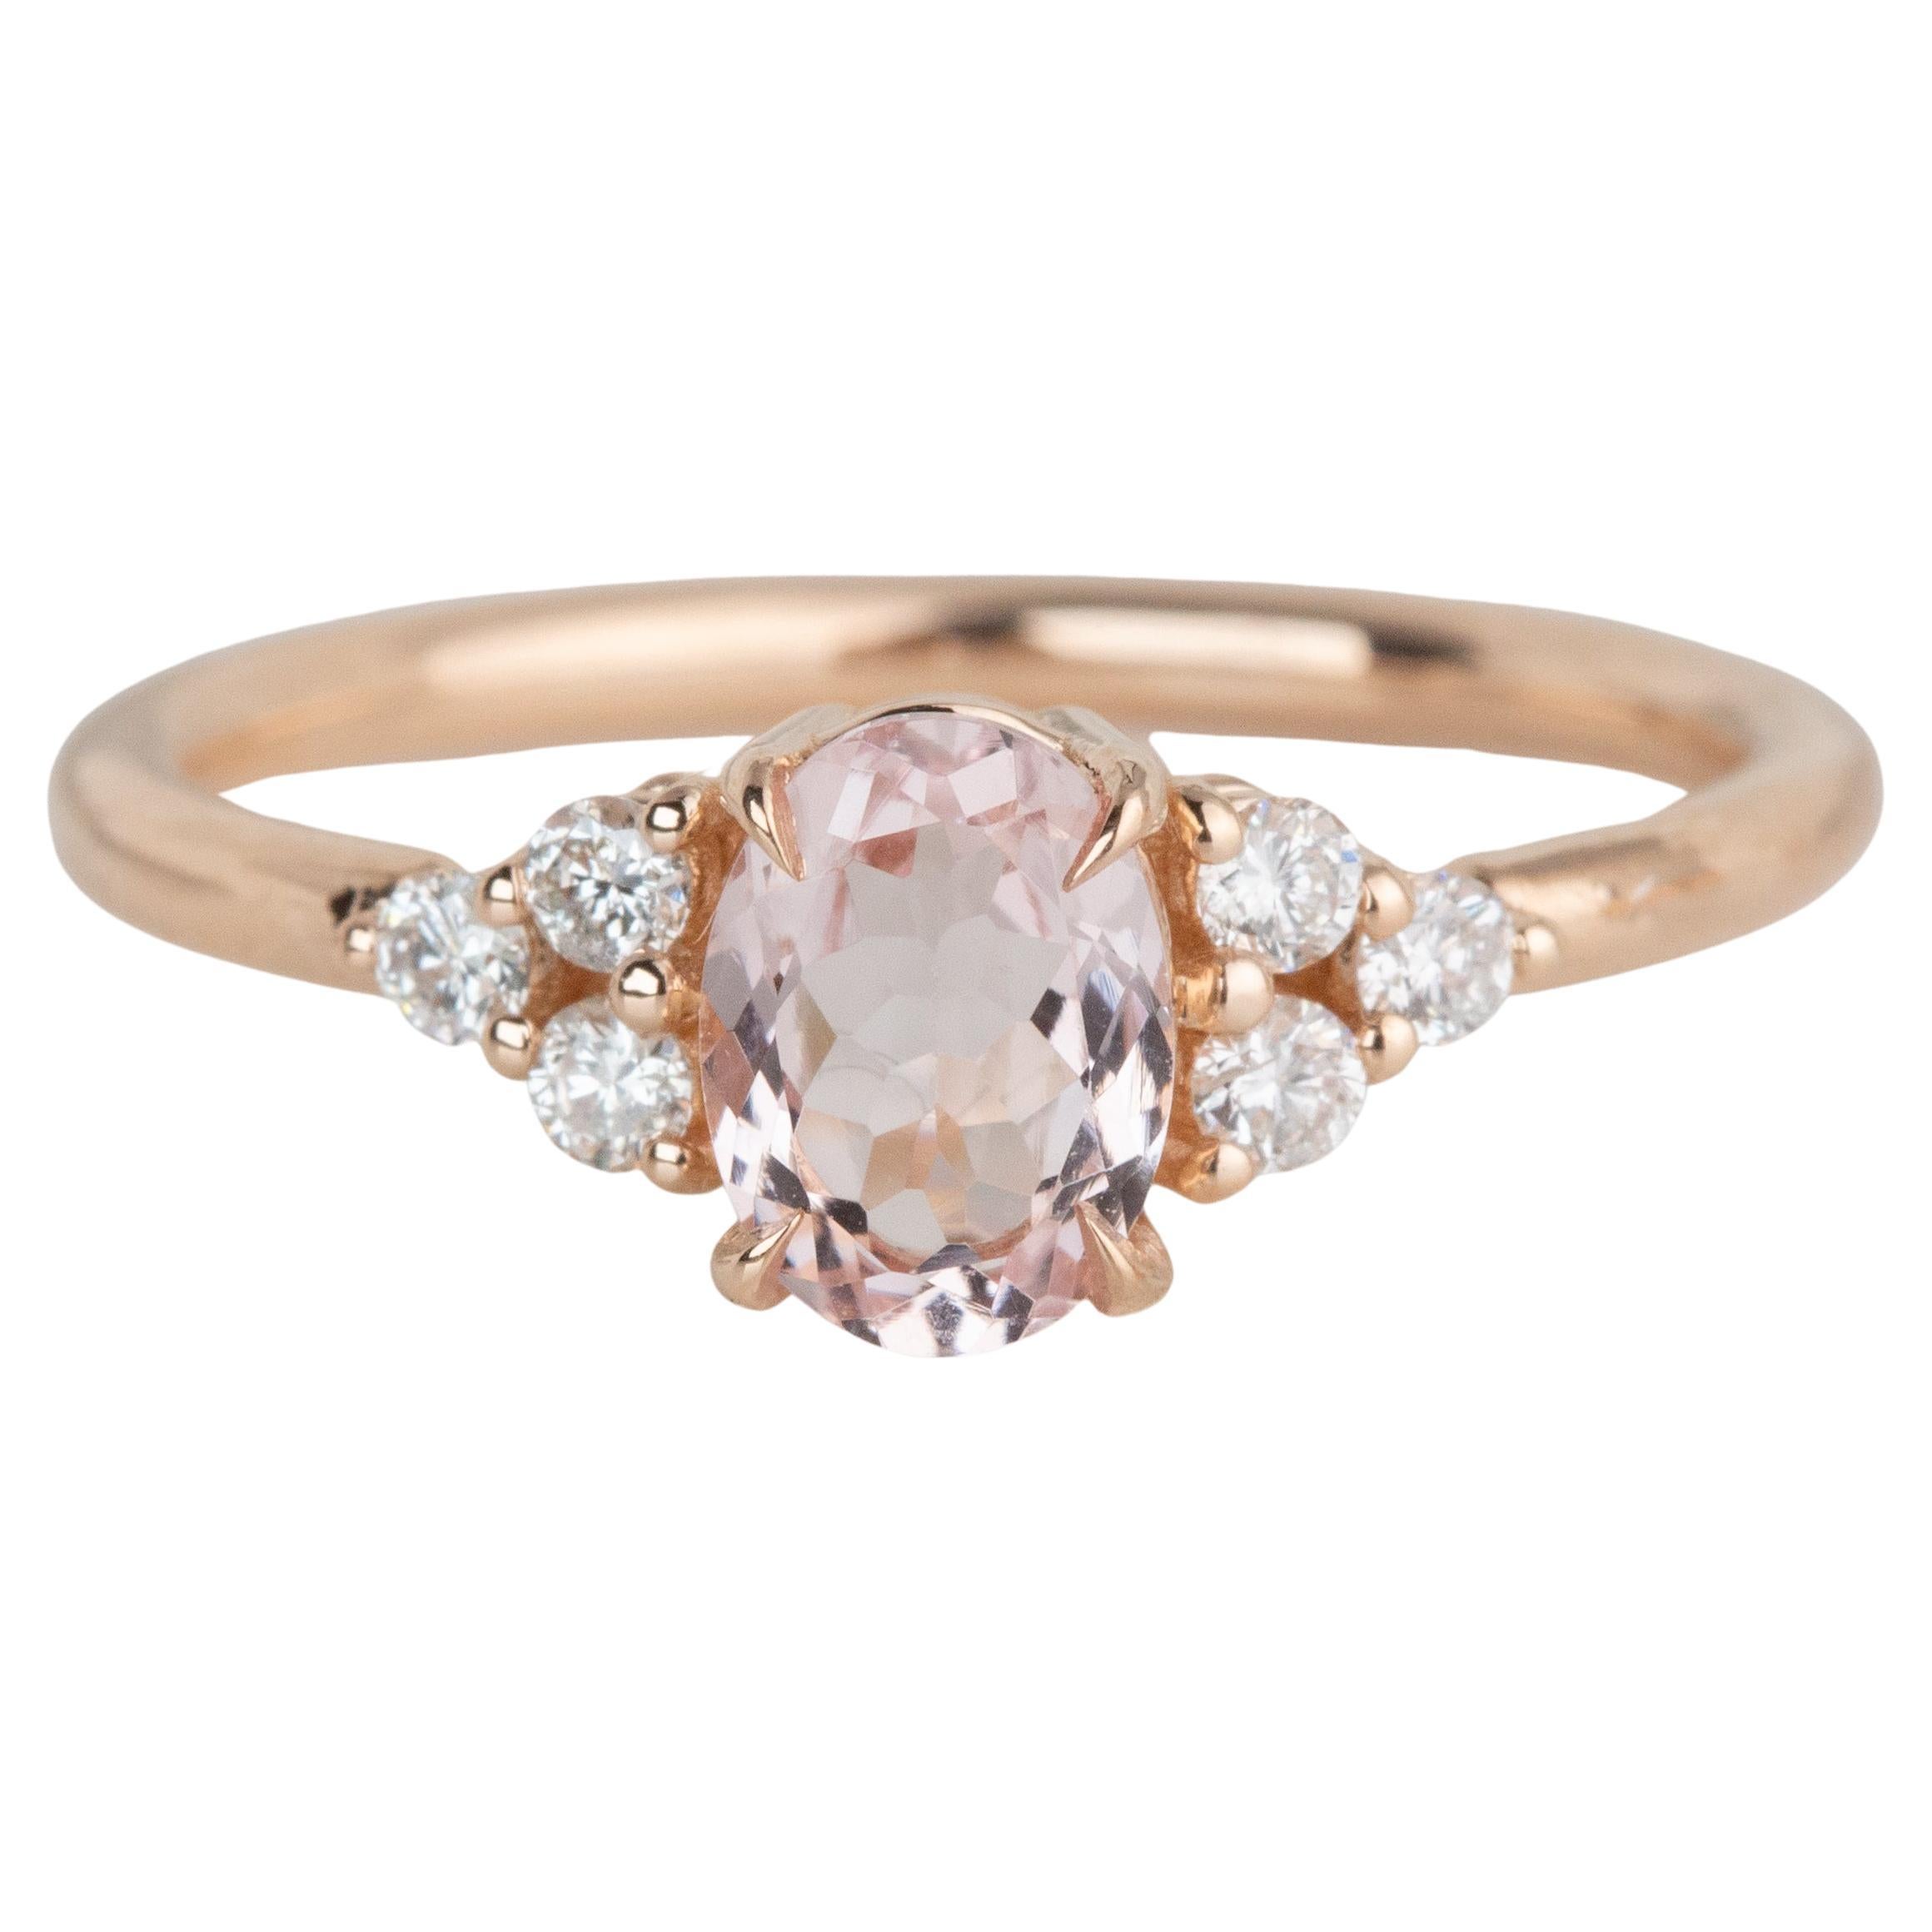 14k Rose Gold 0.65 Ct. Oval Morganite and Diamond Ring